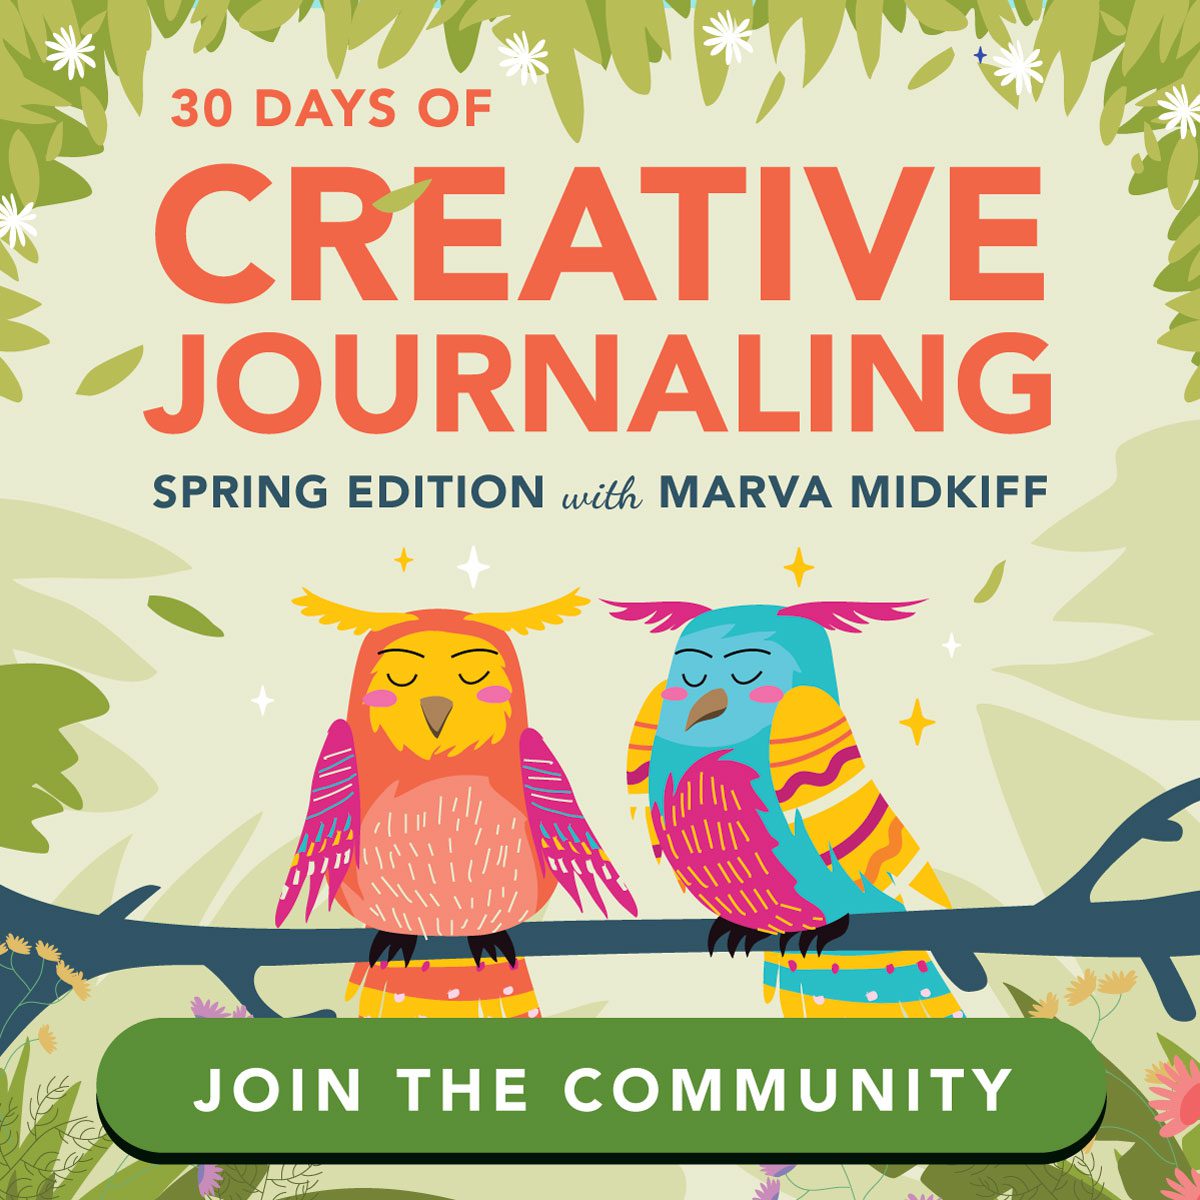 Join 30 Days of Spring Creative Journaling